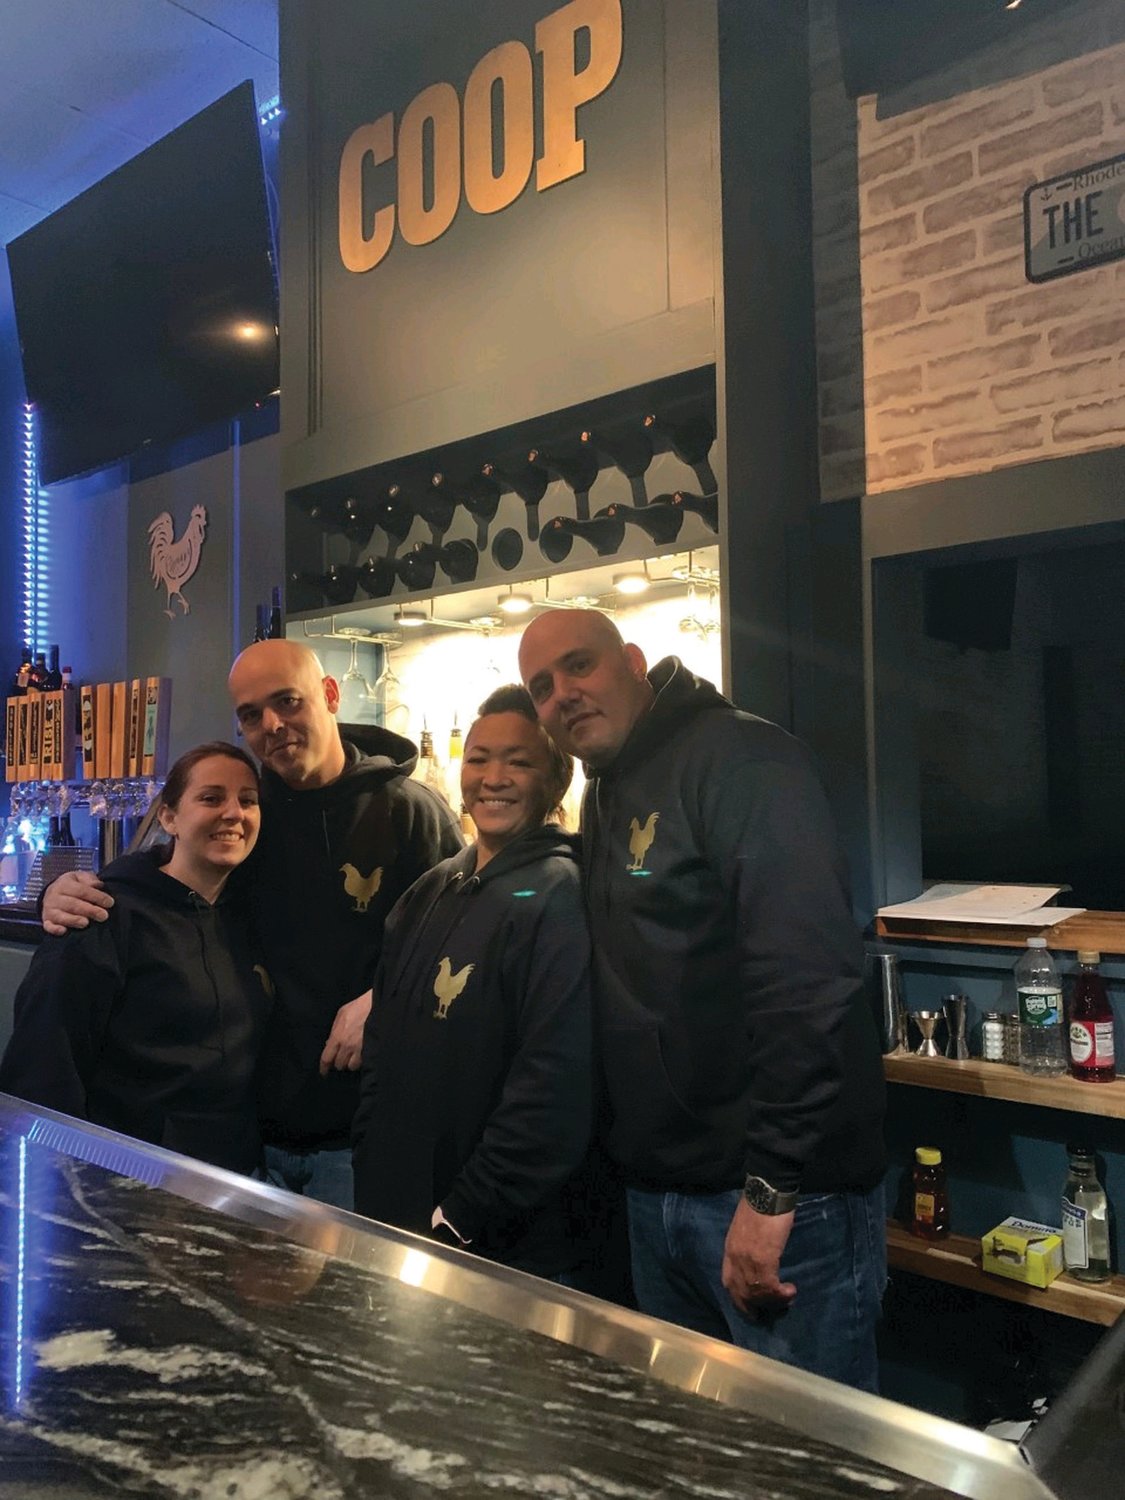 COOP PROPRIETORS: In just a few month, Melisa and Robert Ferruolo, Tonya Antonelli and Mathew Ferruolo have created quite the unique eating and drinking experience inside The Chicken Coop Kitchen and Bar at 1463 Atwood Ave. in Johnston.